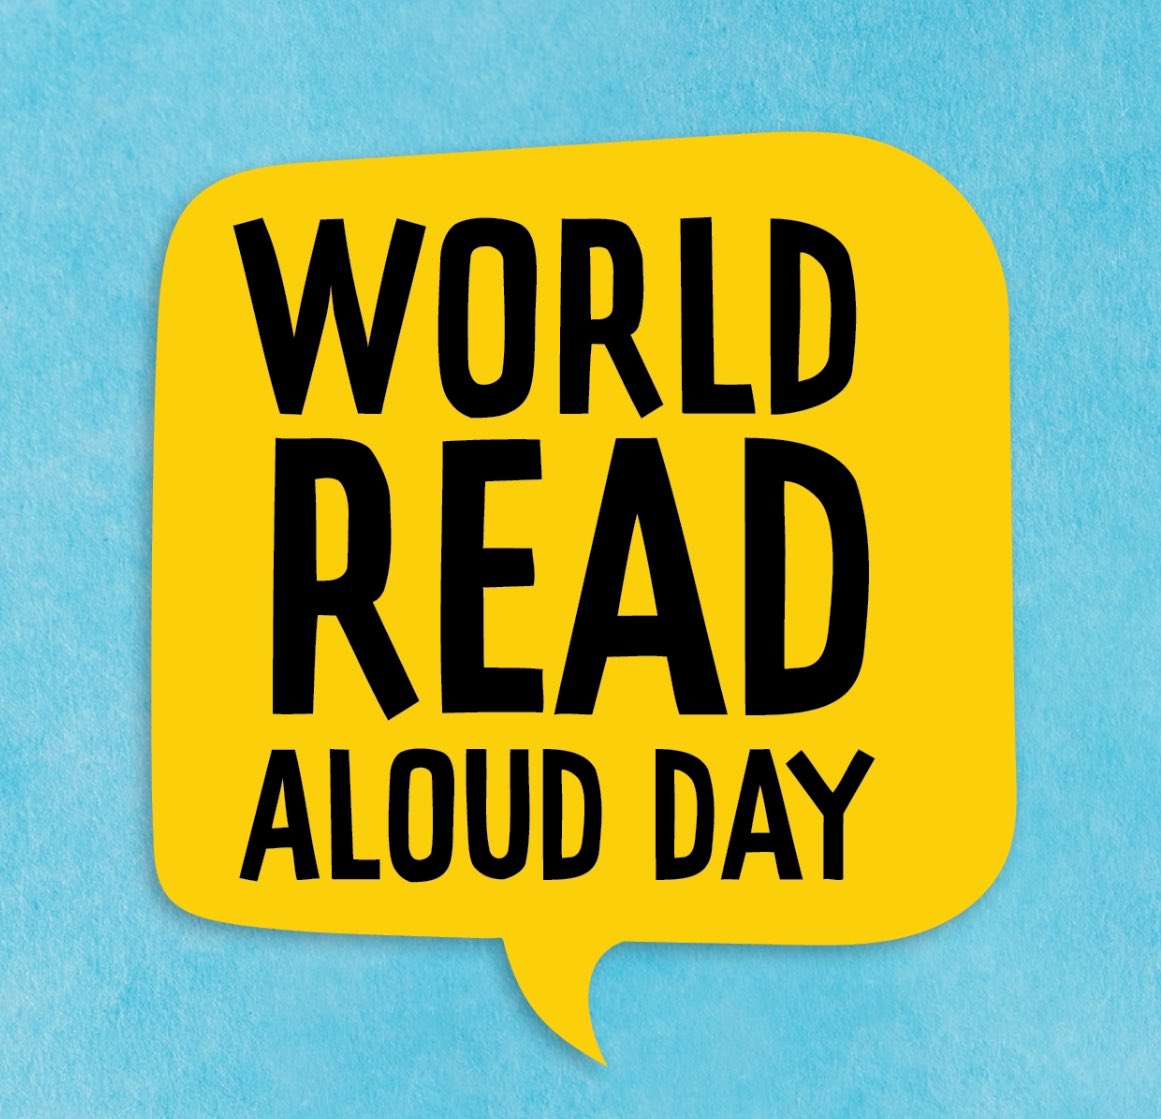 What did you do for #WorldReadAloudDay scholastic.com/worldreadaloud…